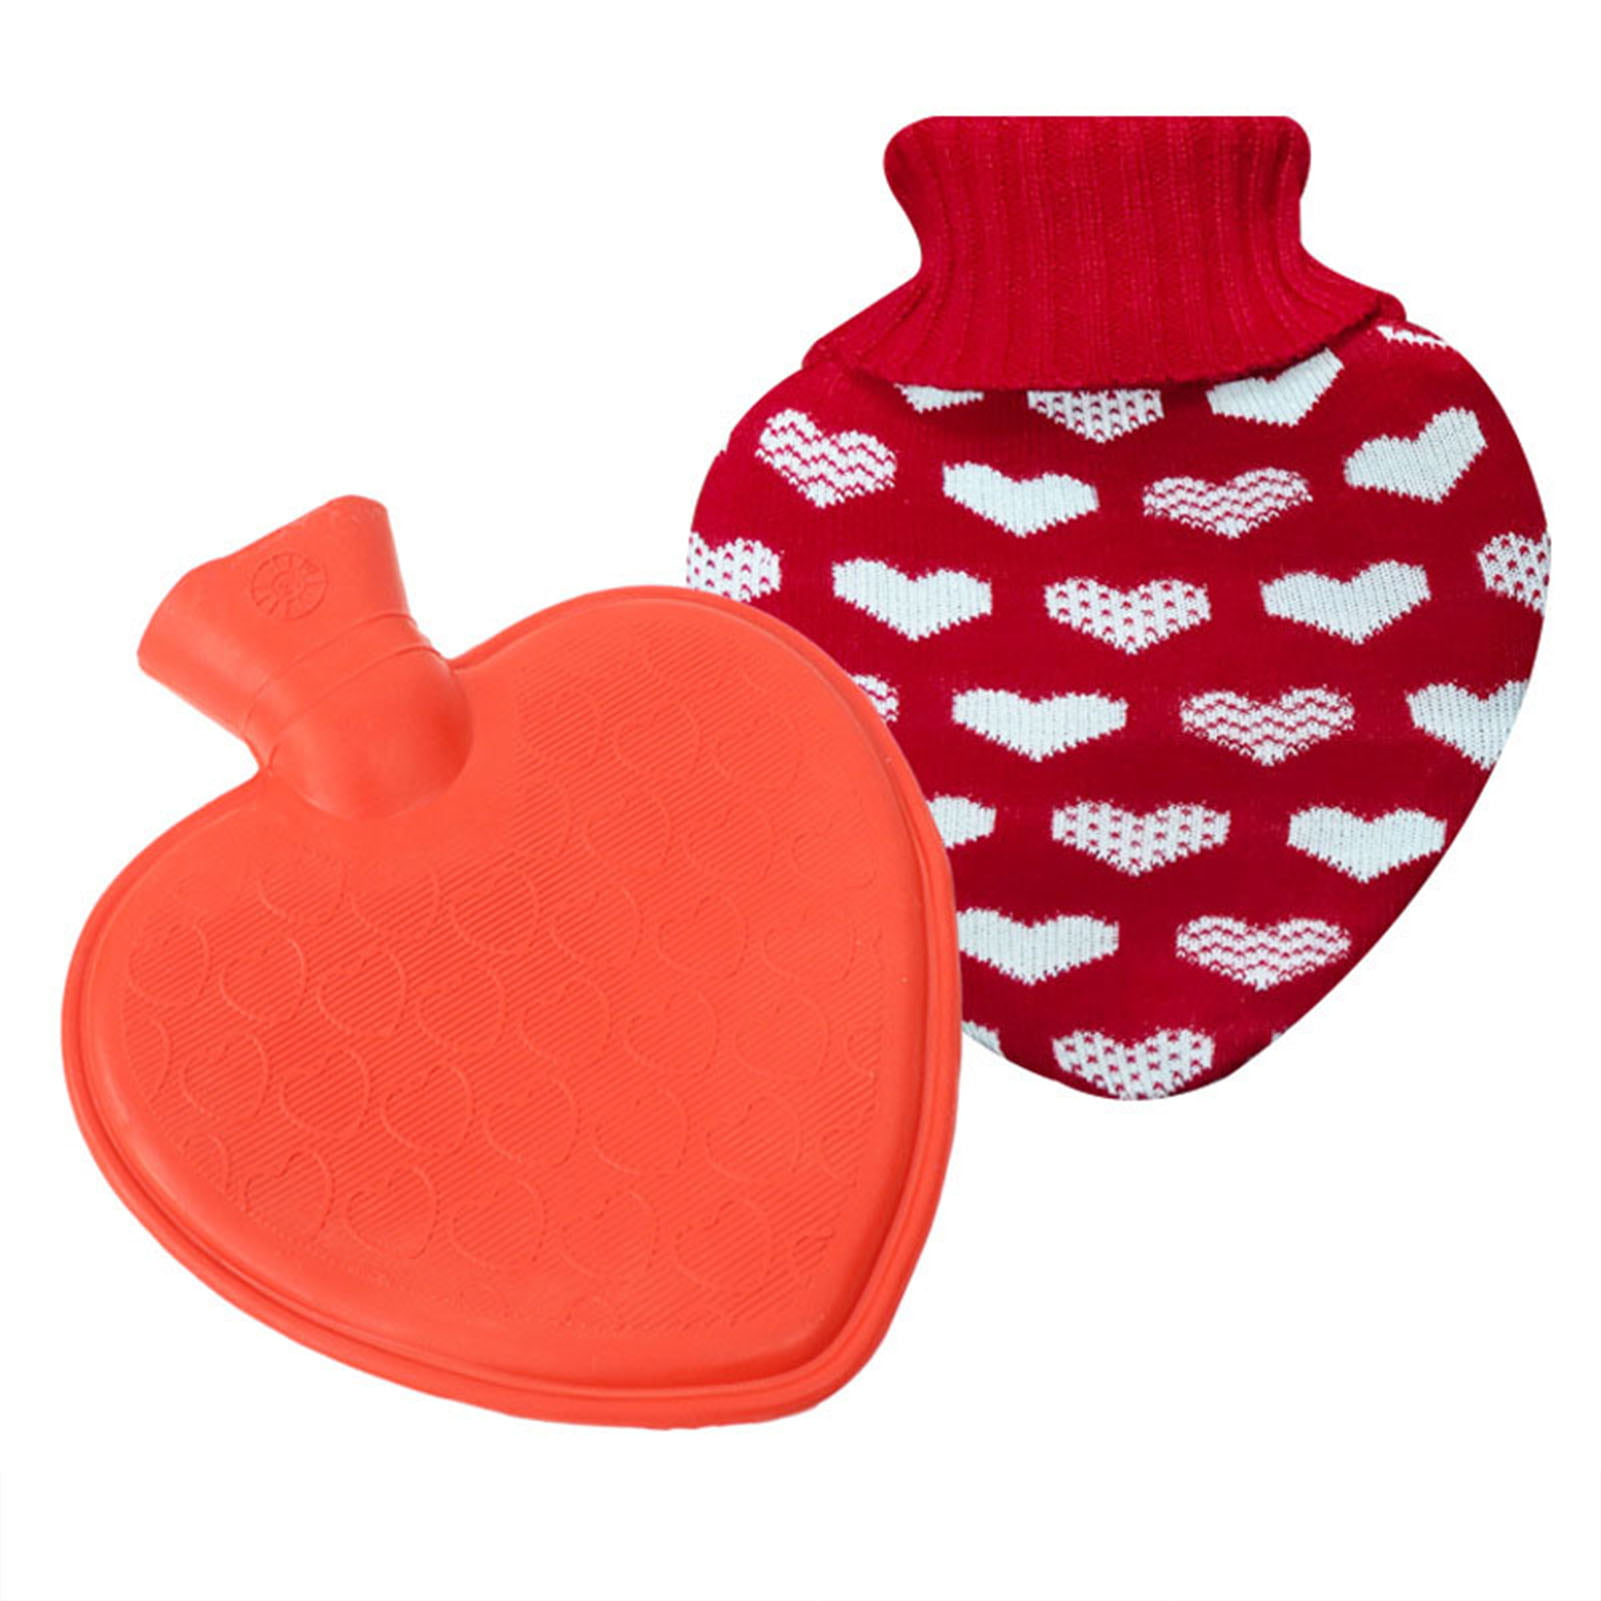 Hot Water Bottle Shaped with Knitted Heart Themed Cover Pocket Hand Warmers 